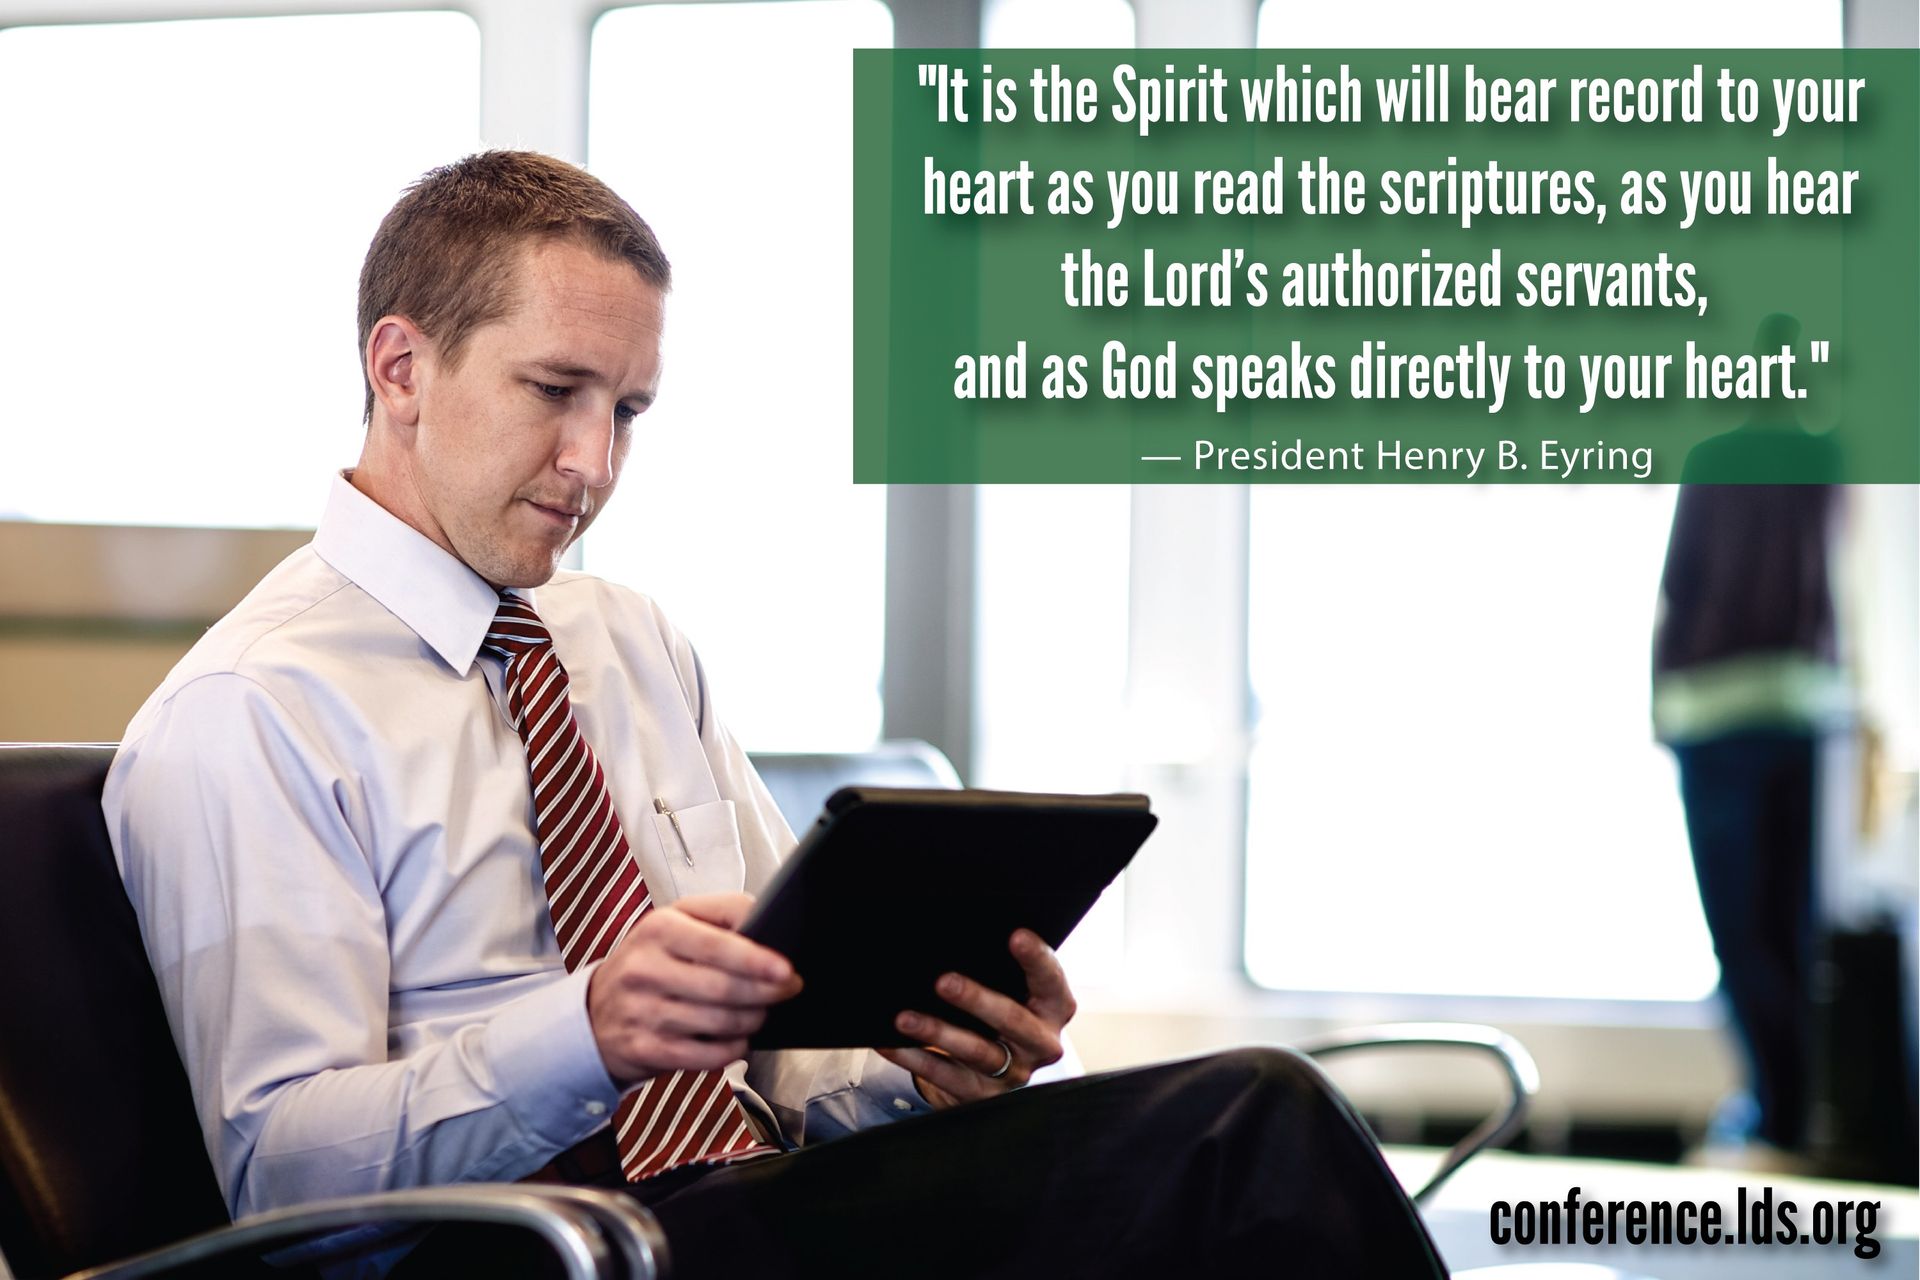 “It is the Spirit which will bear record to your heart as you read the scriptures, as you hear the Lord’s authorized servants, and as God speaks directly to your heart.”—President Henry B. Eyring, “To Draw Closer to God” © undefined ipCode 1.